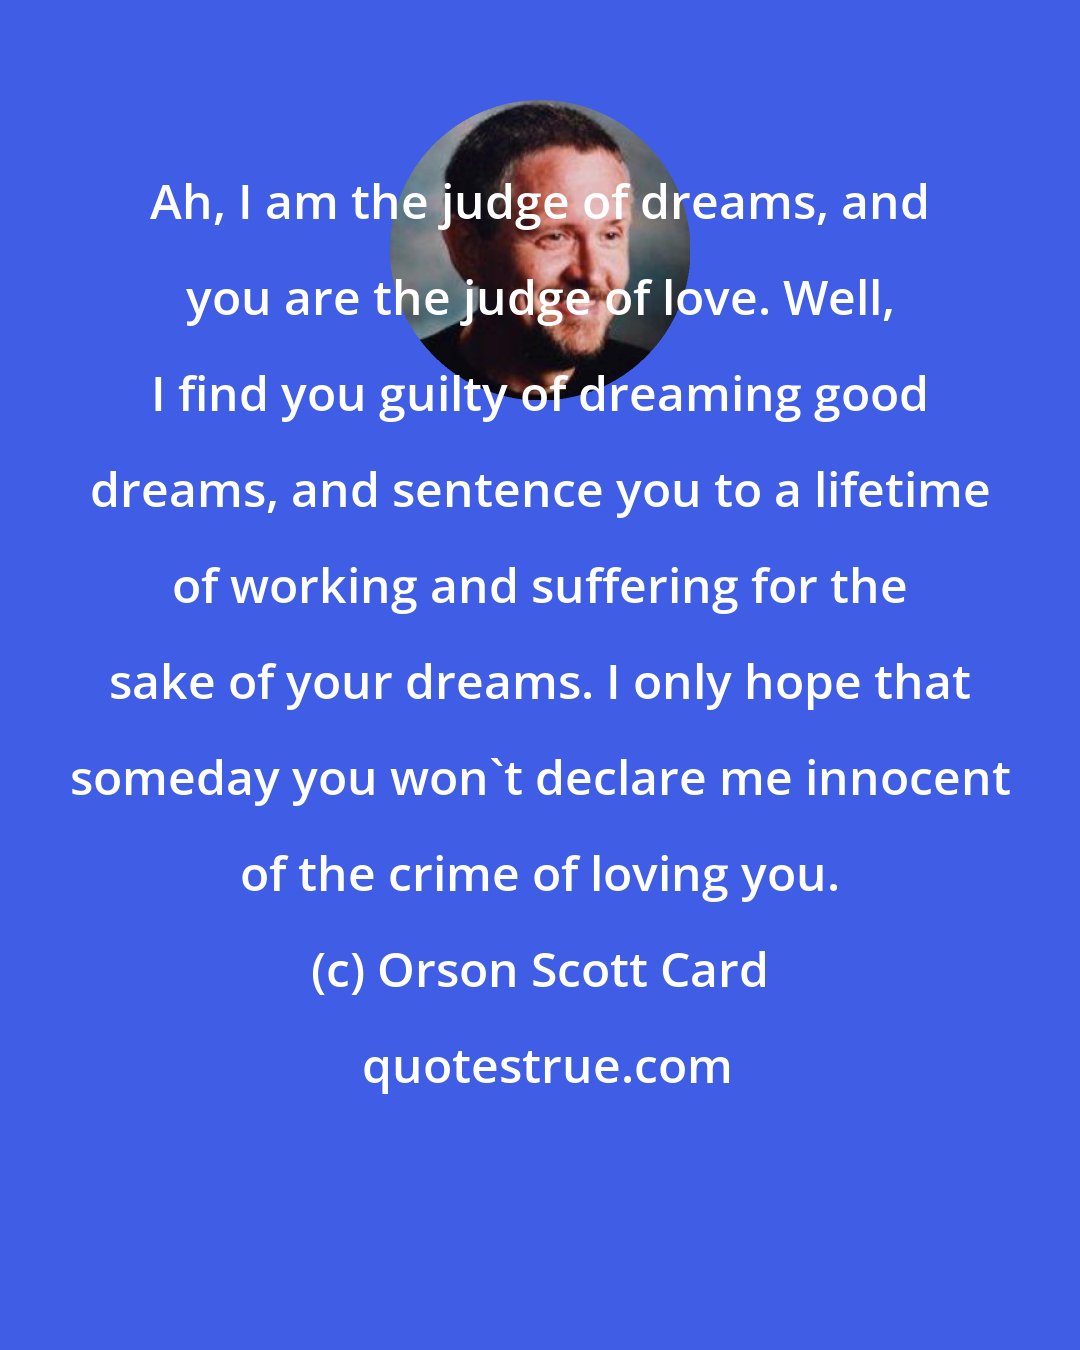 Orson Scott Card: Ah, I am the judge of dreams, and you are the judge of love. Well, I find you guilty of dreaming good dreams, and sentence you to a lifetime of working and suffering for the sake of your dreams. I only hope that someday you won't declare me innocent of the crime of loving you.